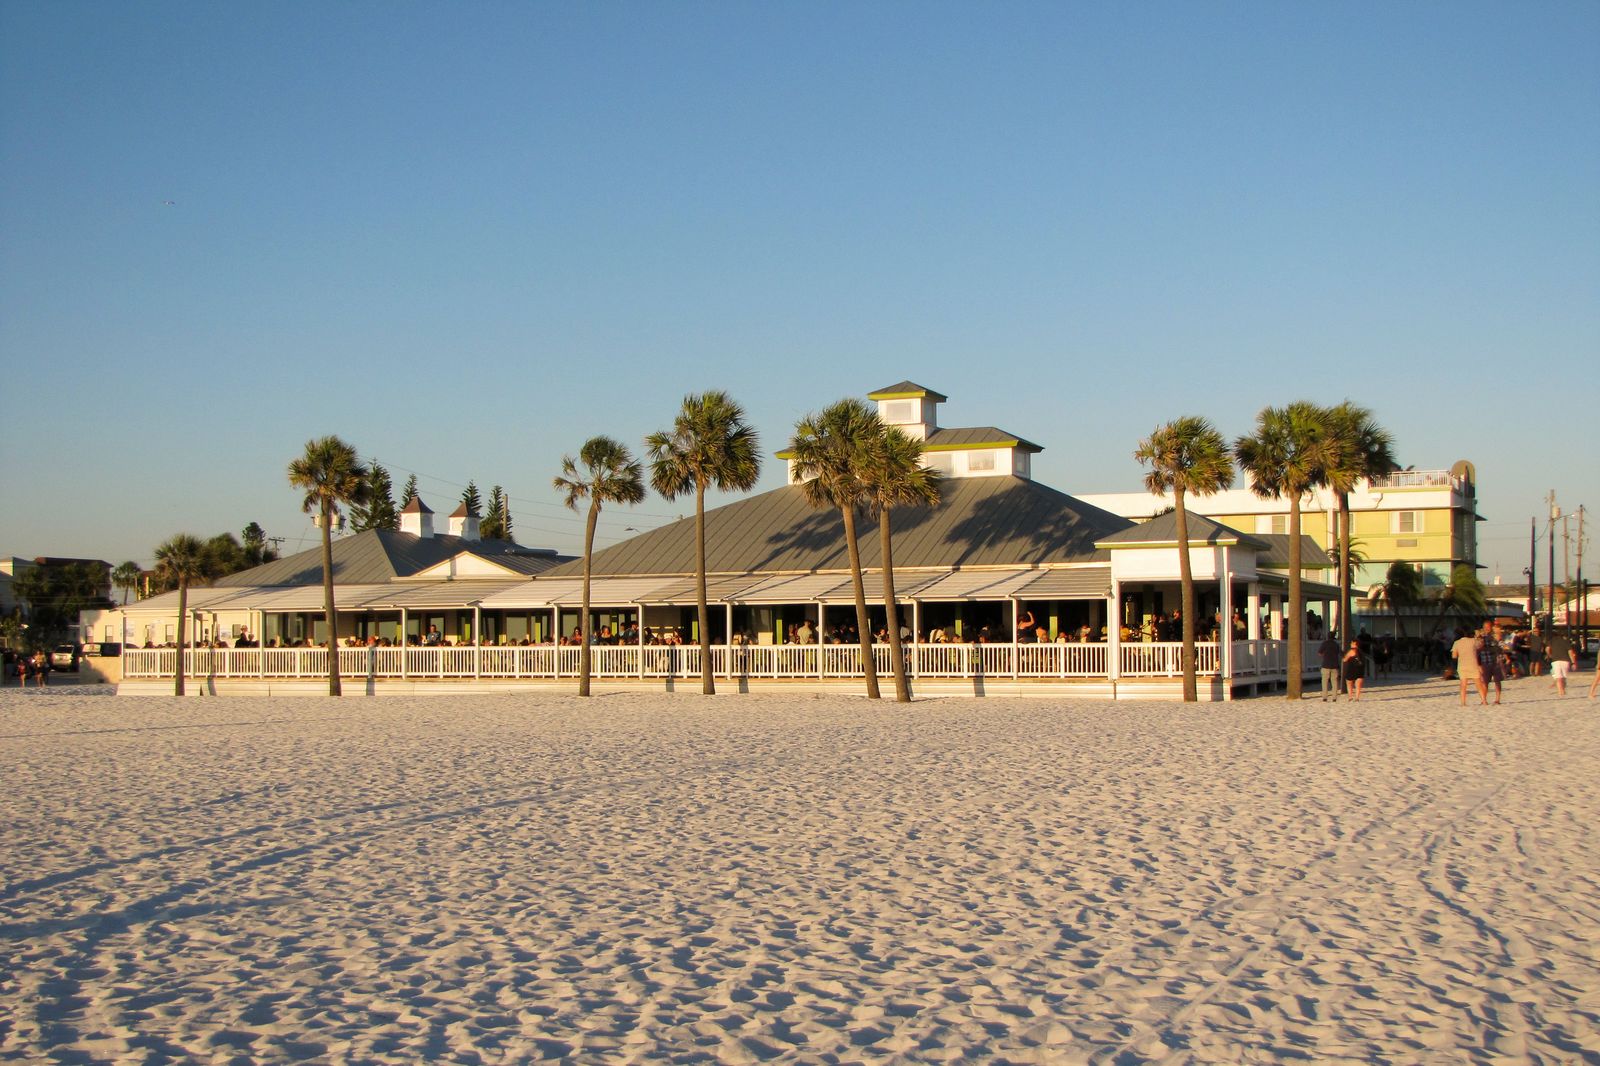 Das Palm Pavilion Beachside Bar & Grill in Clearwater, Florida